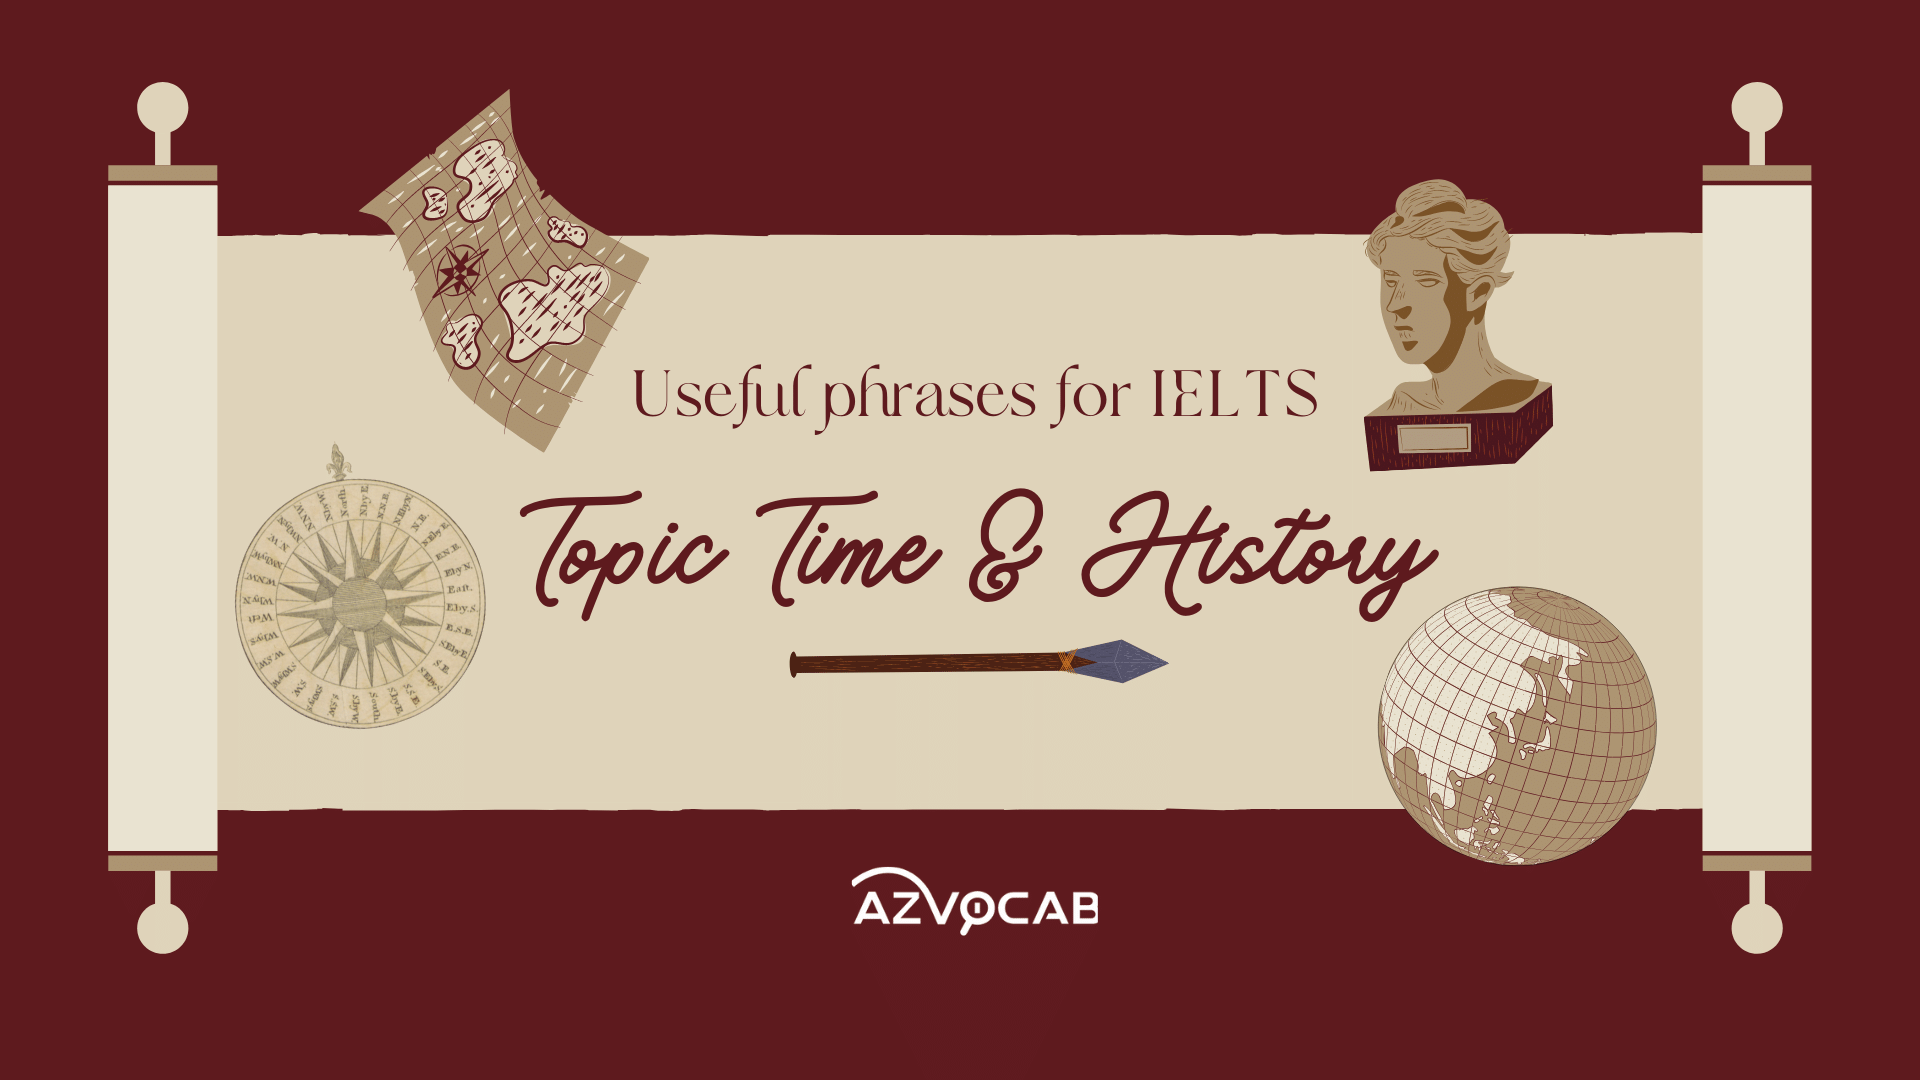 Useful phrases for IELTS Time and History